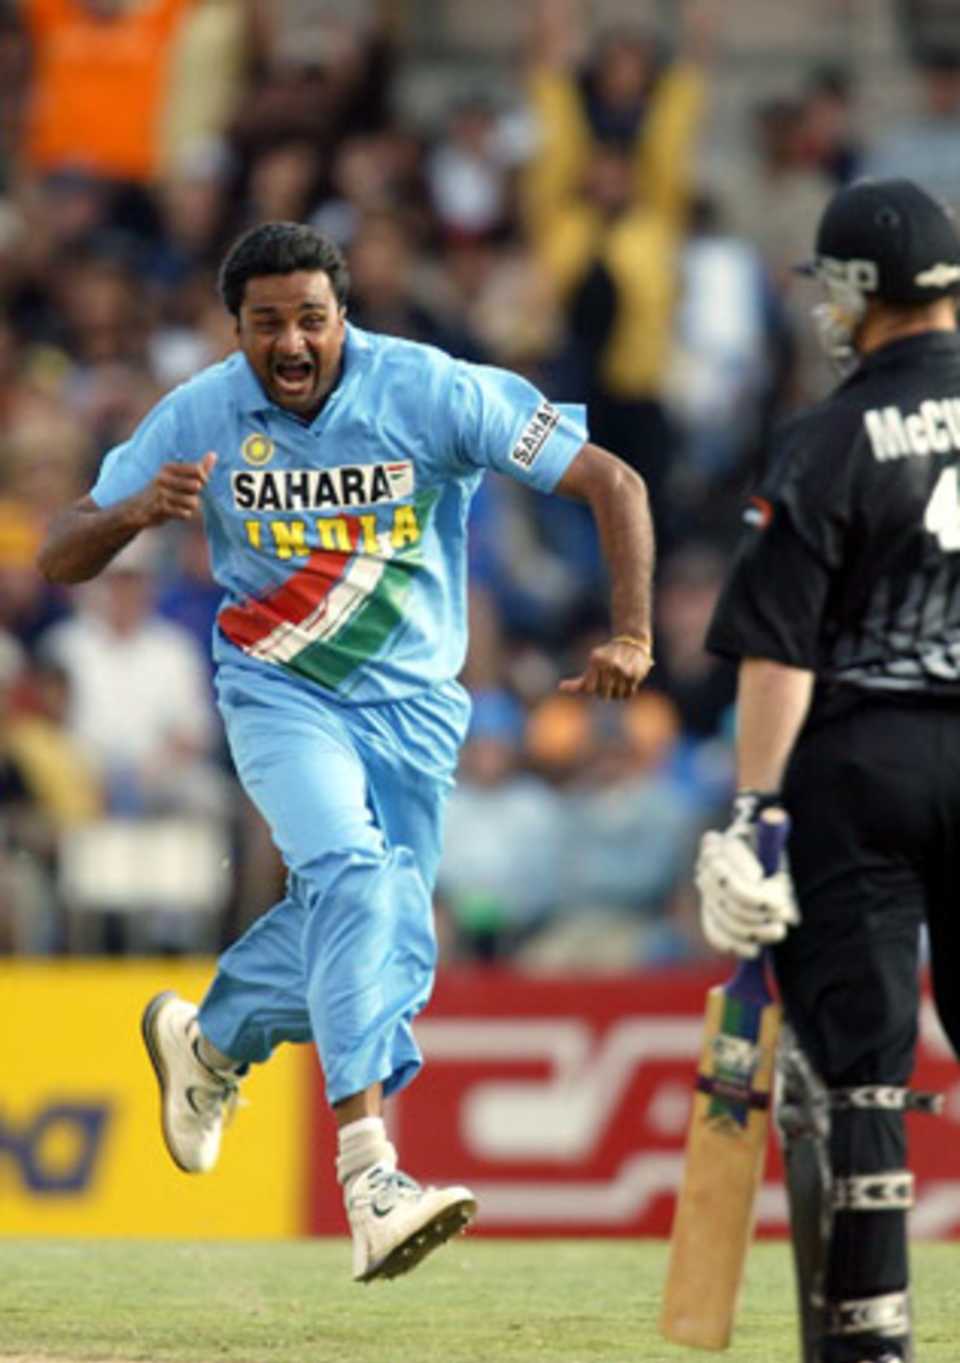 Indian bowler Javagal Srinath celebrates the dismissal of New Zealand batsman Brendon McCullum, caught by wicket-keeper Rahul Dravid for four. 1st ODI: New Zealand v India at Eden Park, Auckland, 26 December 2002.